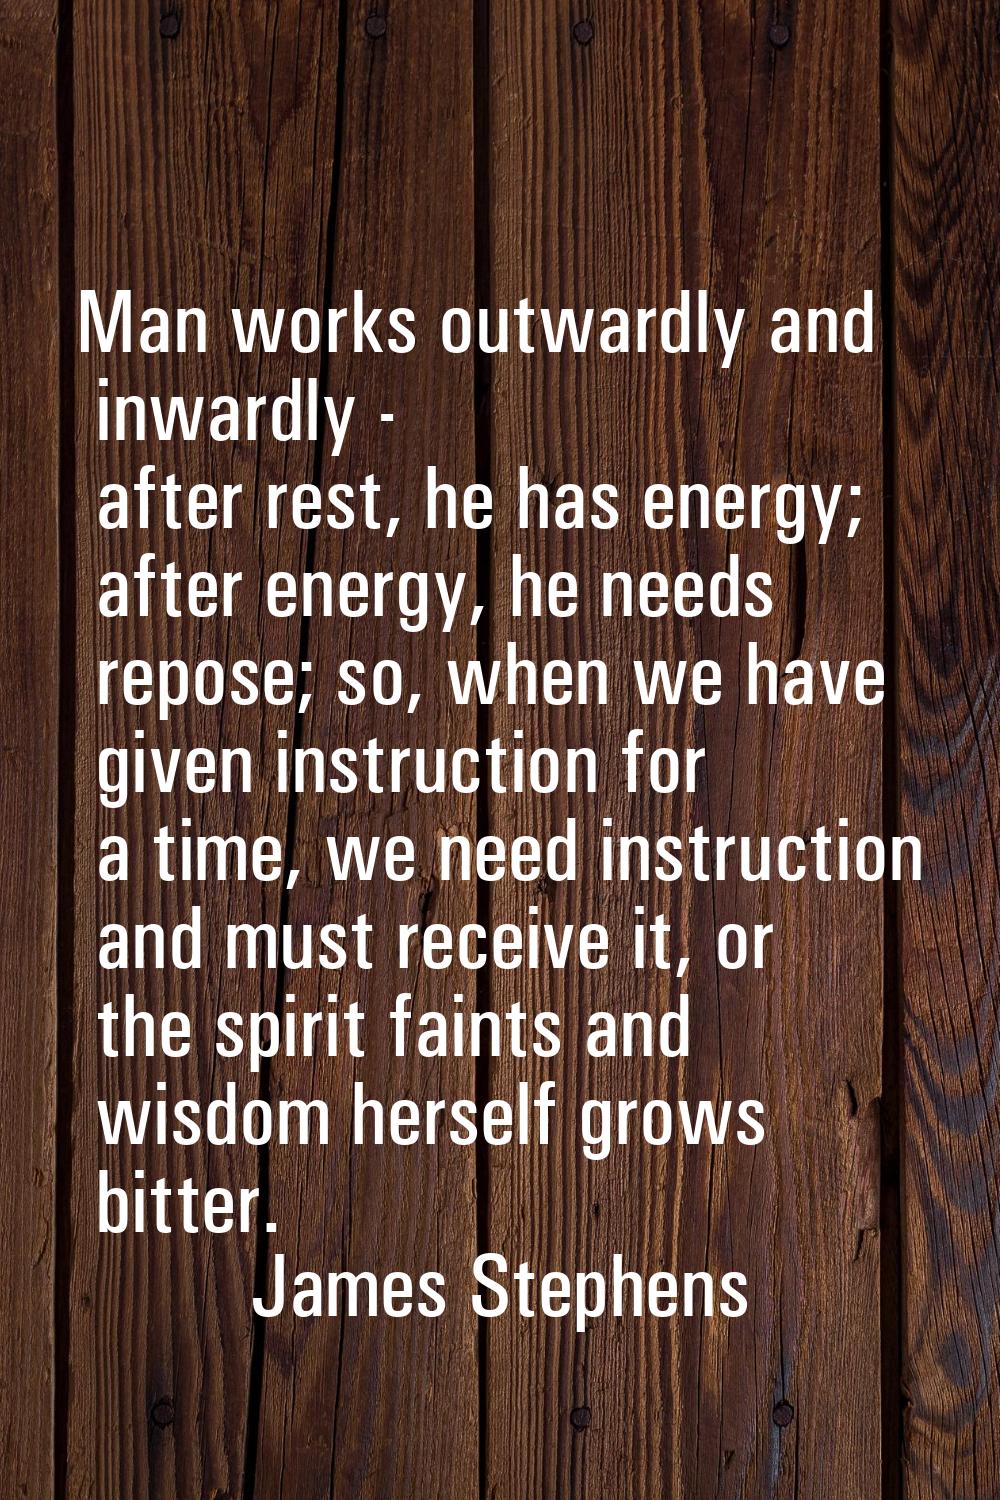 Man works outwardly and inwardly - after rest, he has energy; after energy, he needs repose; so, wh